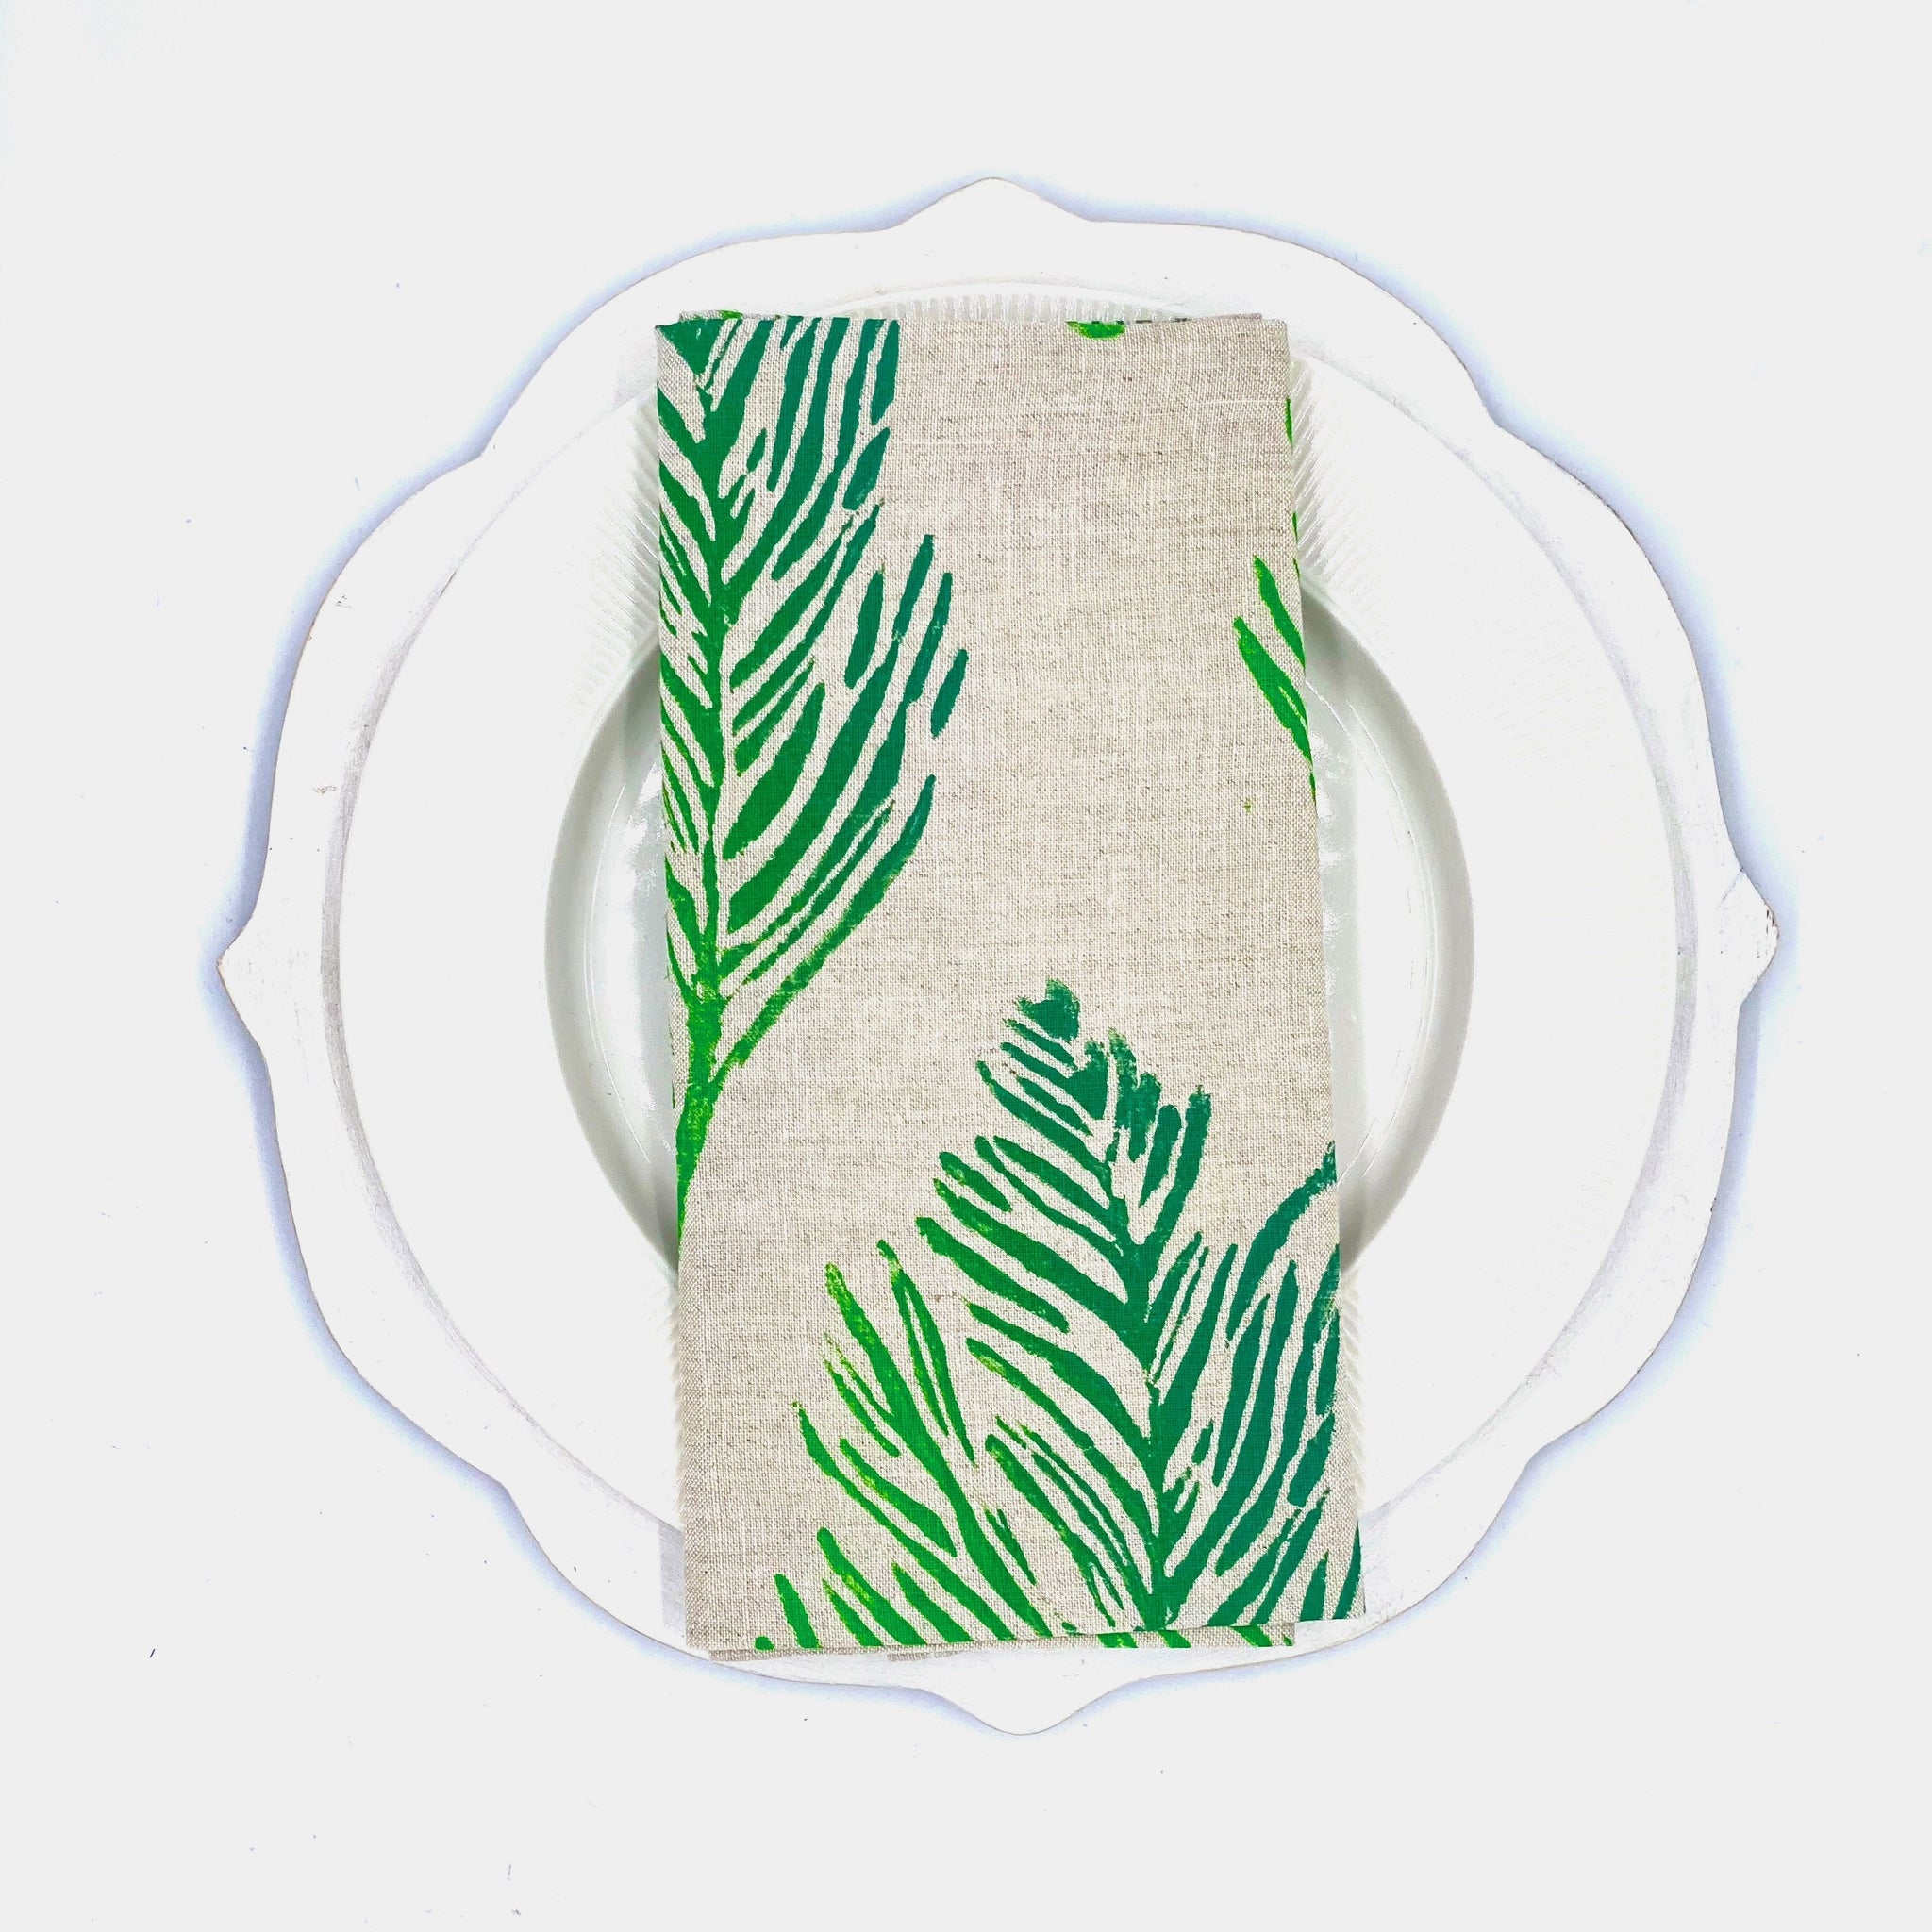 Feathers in Forest Floor Linen Napkins, Set of 4